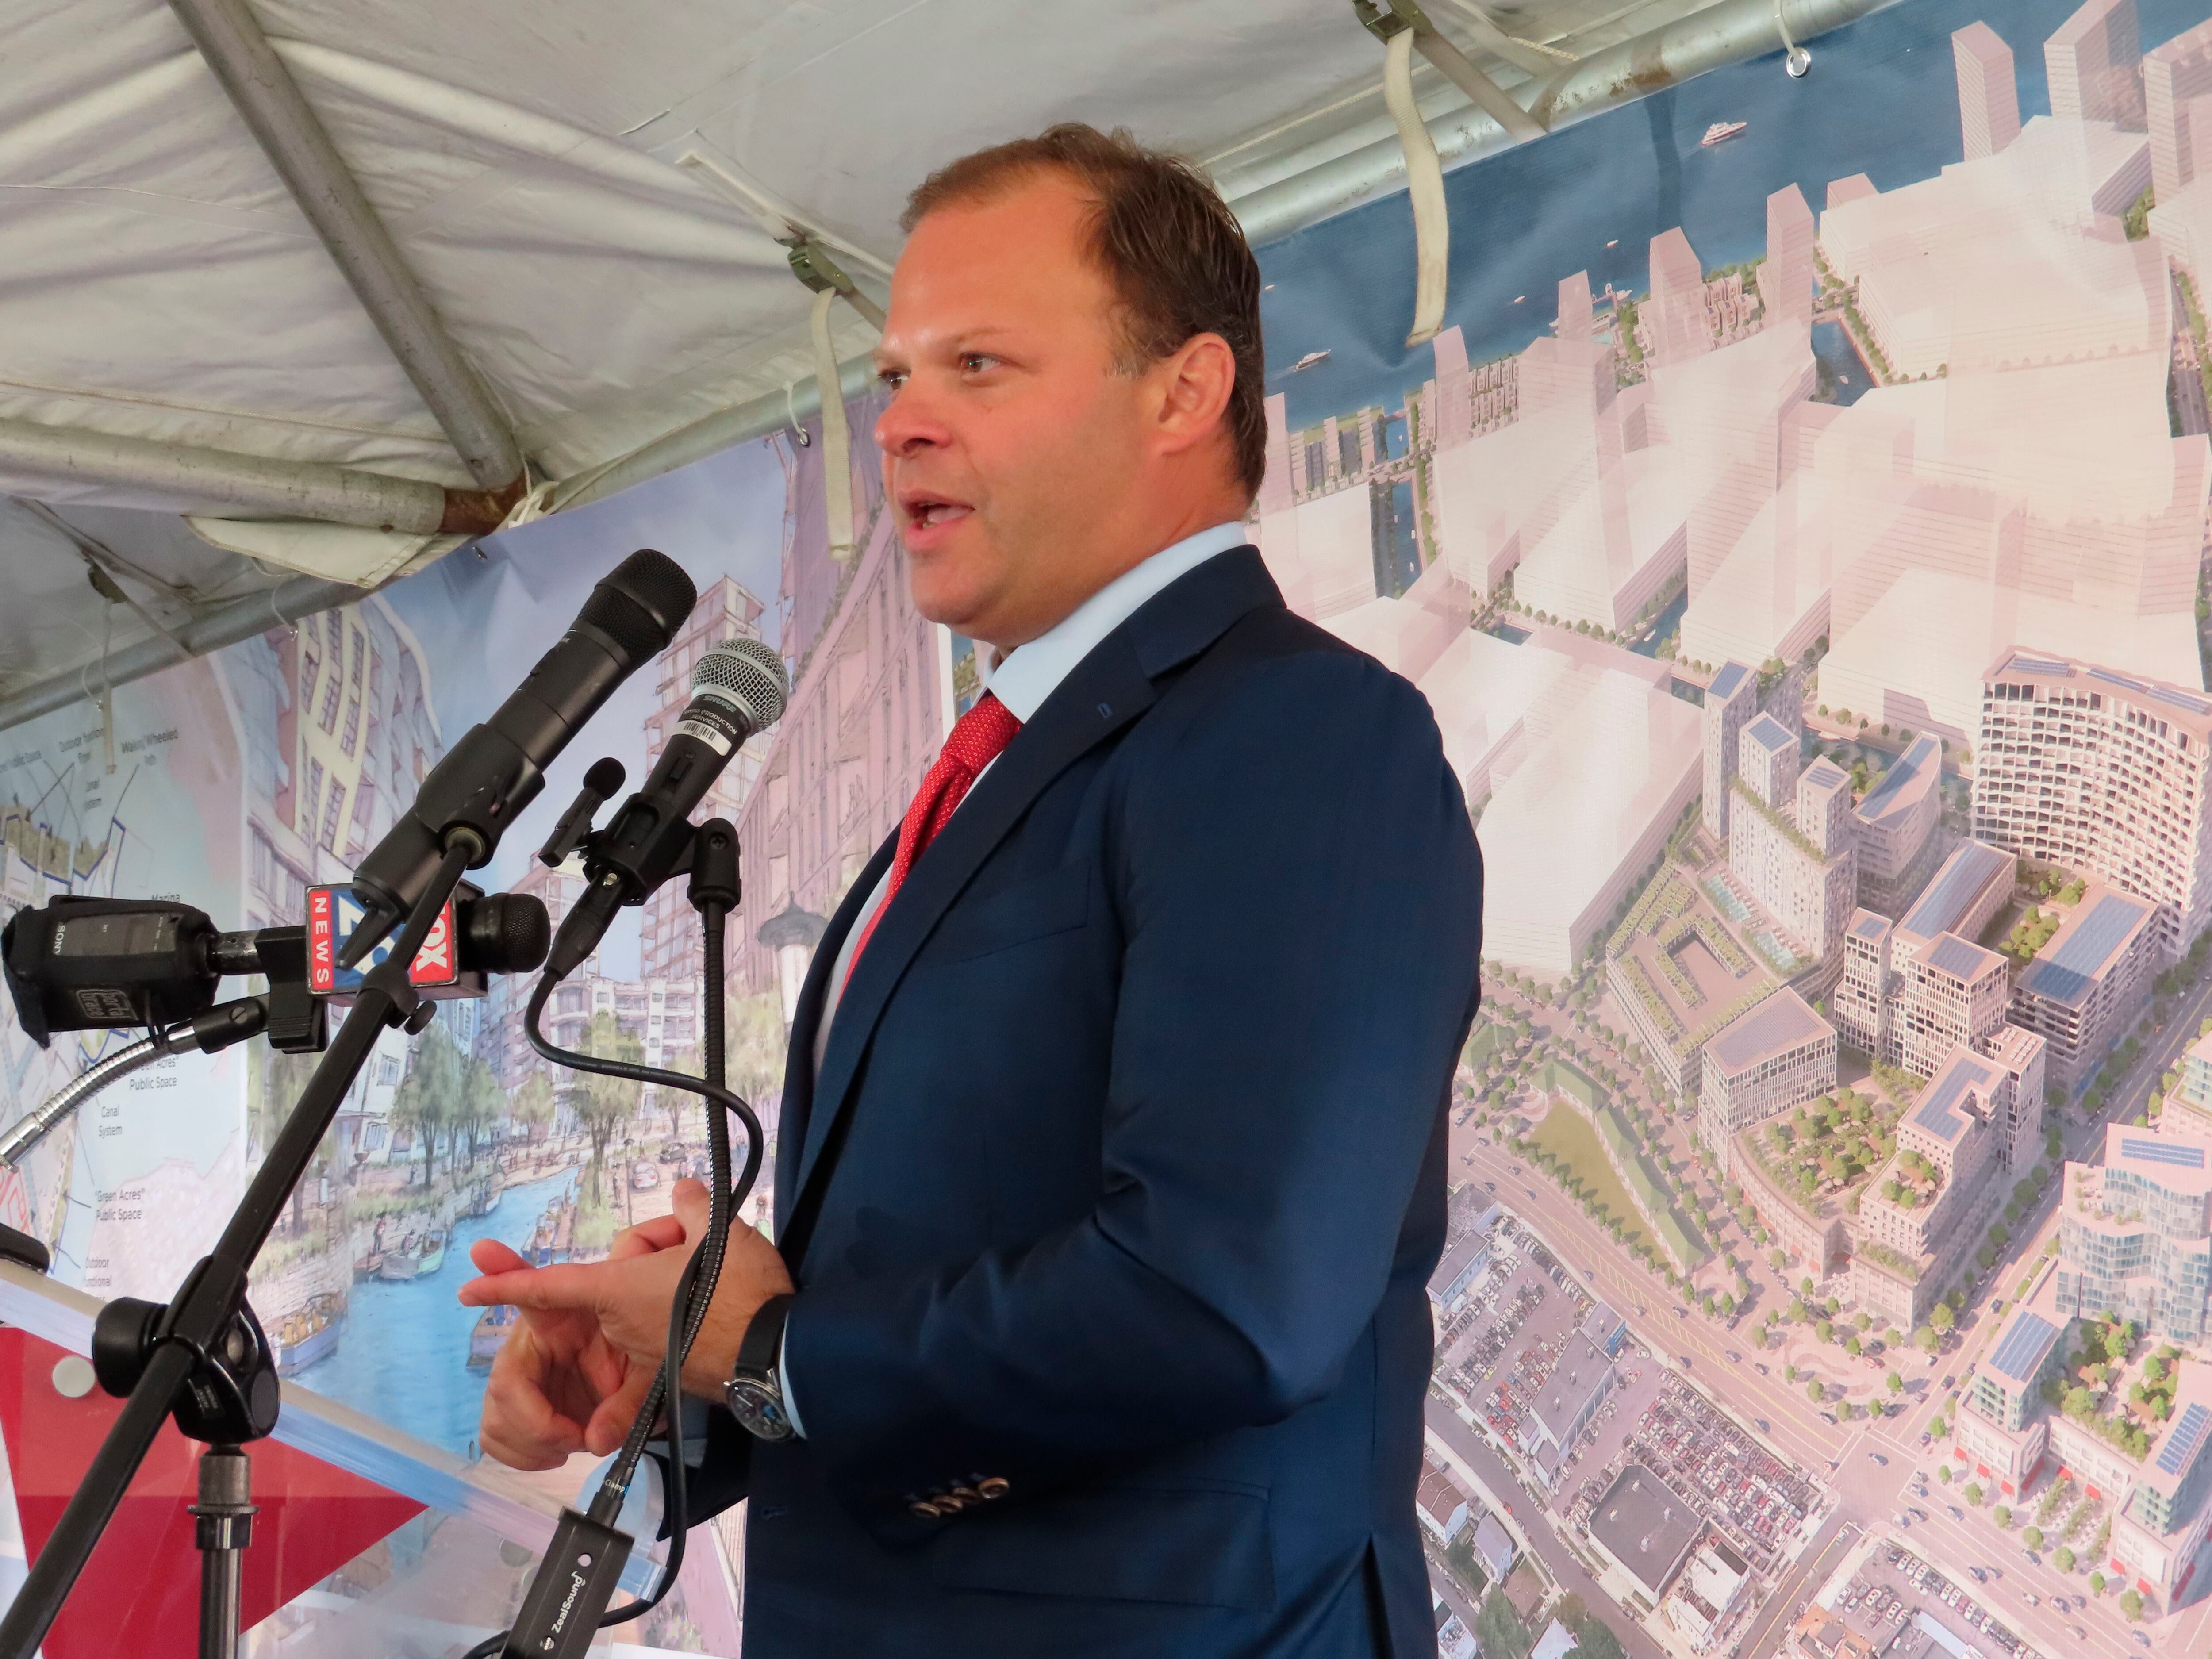 Blatstein group proposes $3B water-intensive development for Bader Field in Atlantic  City